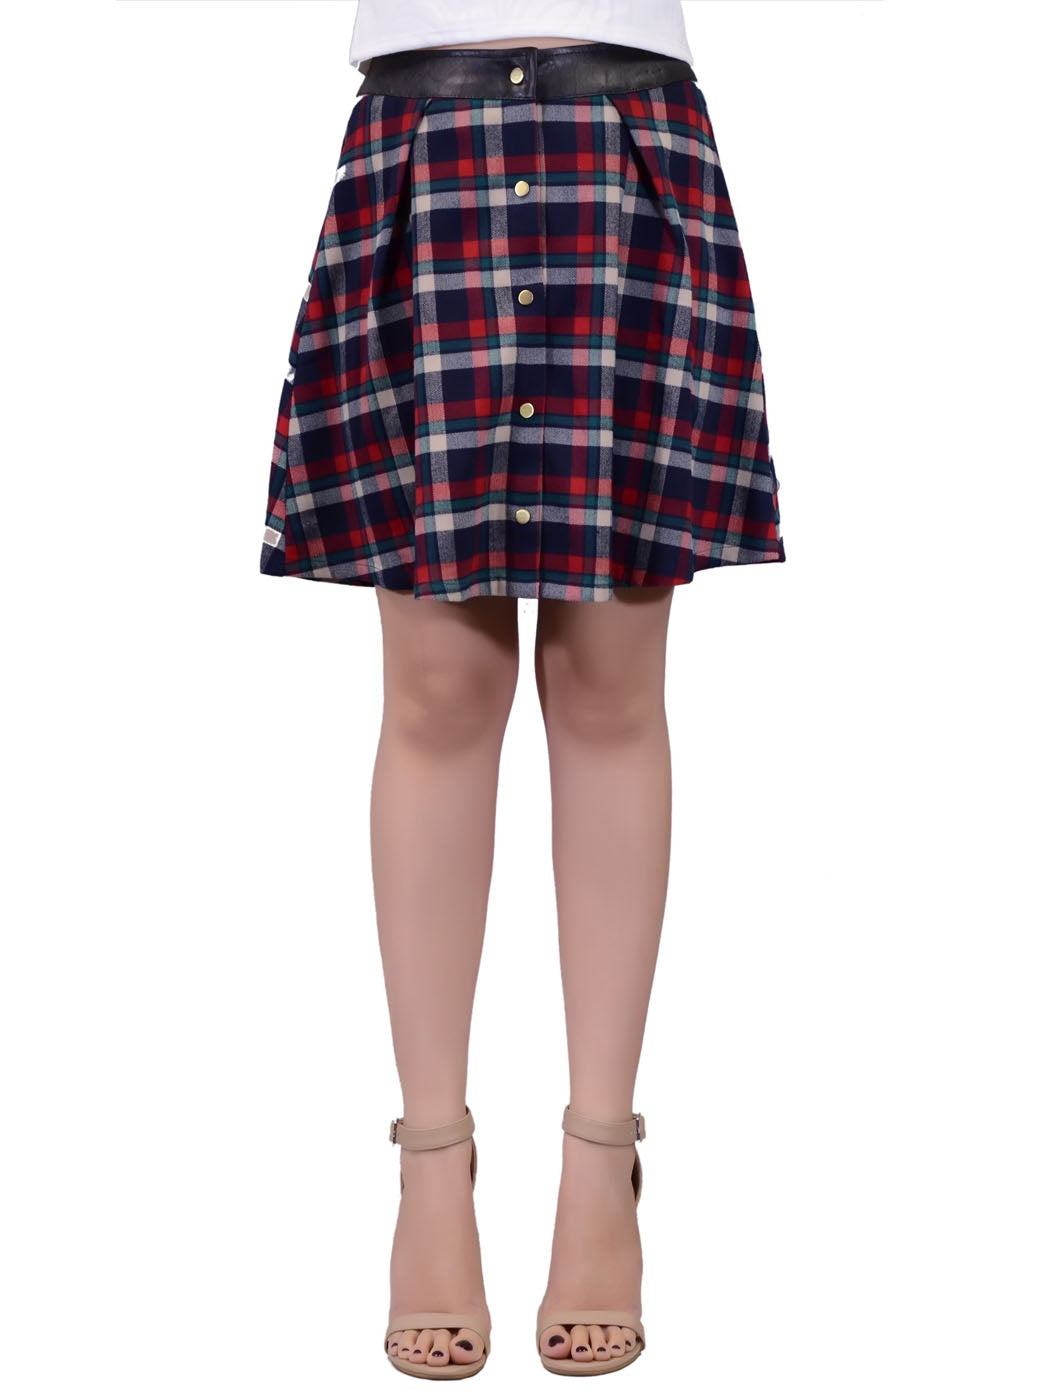 Double Zero Plaid Printed Skater Style Skirt With Faux Leather Waist And Buttons - ALILANG.COM